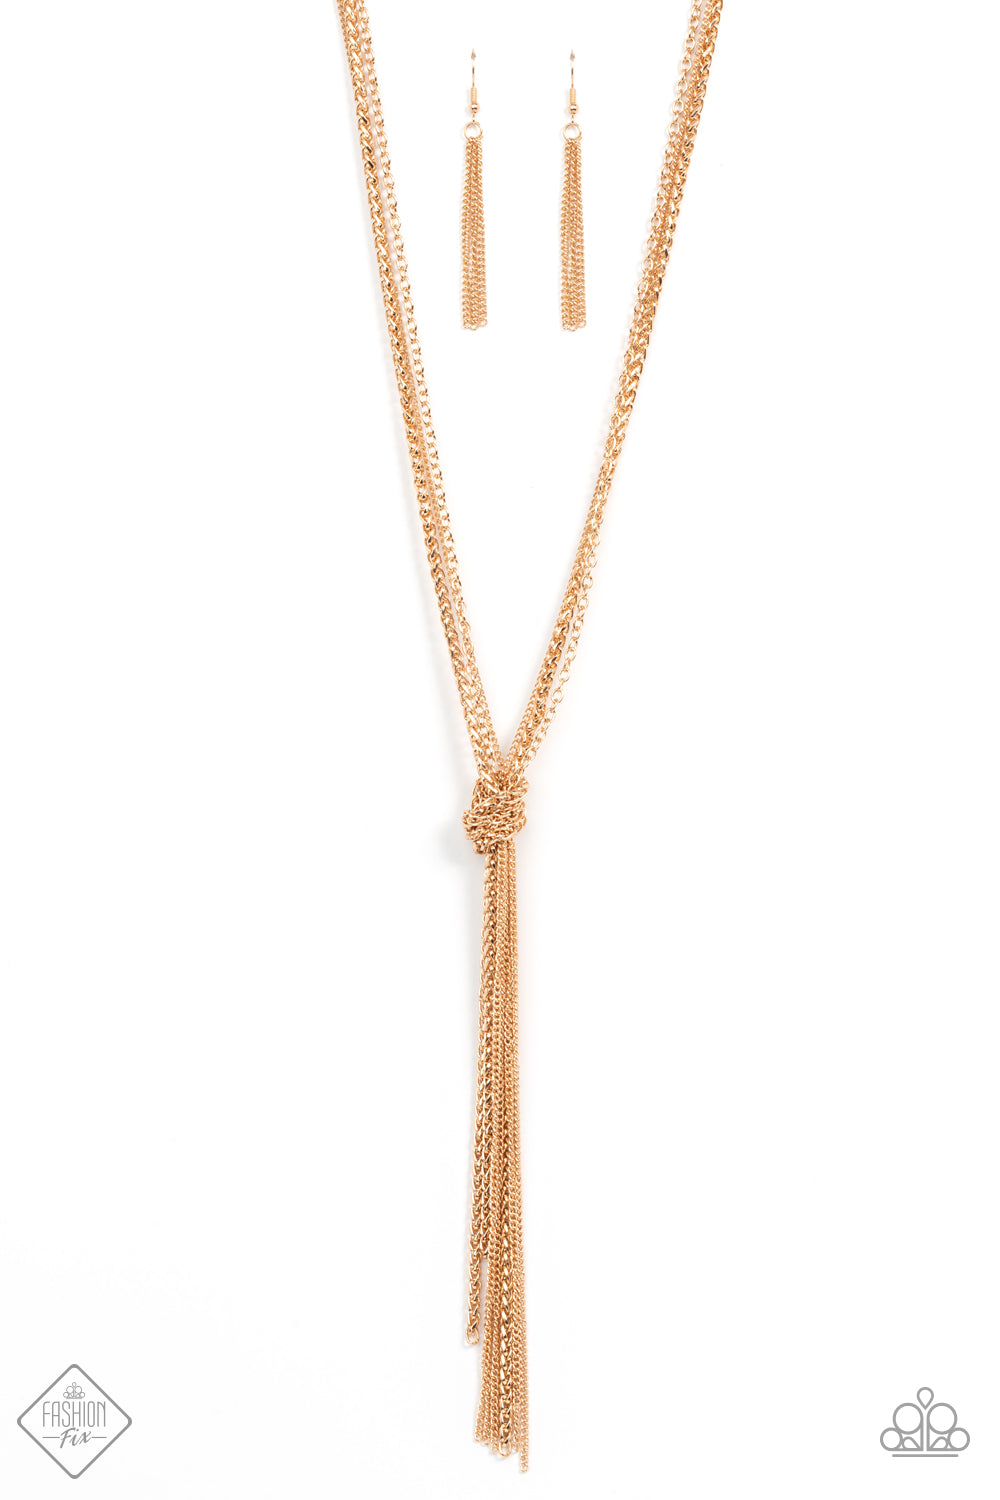 Knot All There - Gold Tassel Necklaces strands of long glistening gold chains in round, delicate, and classic styles are pulled together in a sassy knot creating a show-stopping fringe tassel and a flirty finish. Features an adjustable clasp closure.  Sold as one individual necklace. Includes one pair of matching earrings.  Paparazzi Jewelry is lead and nickel free so it's perfect for sensitive skin too!